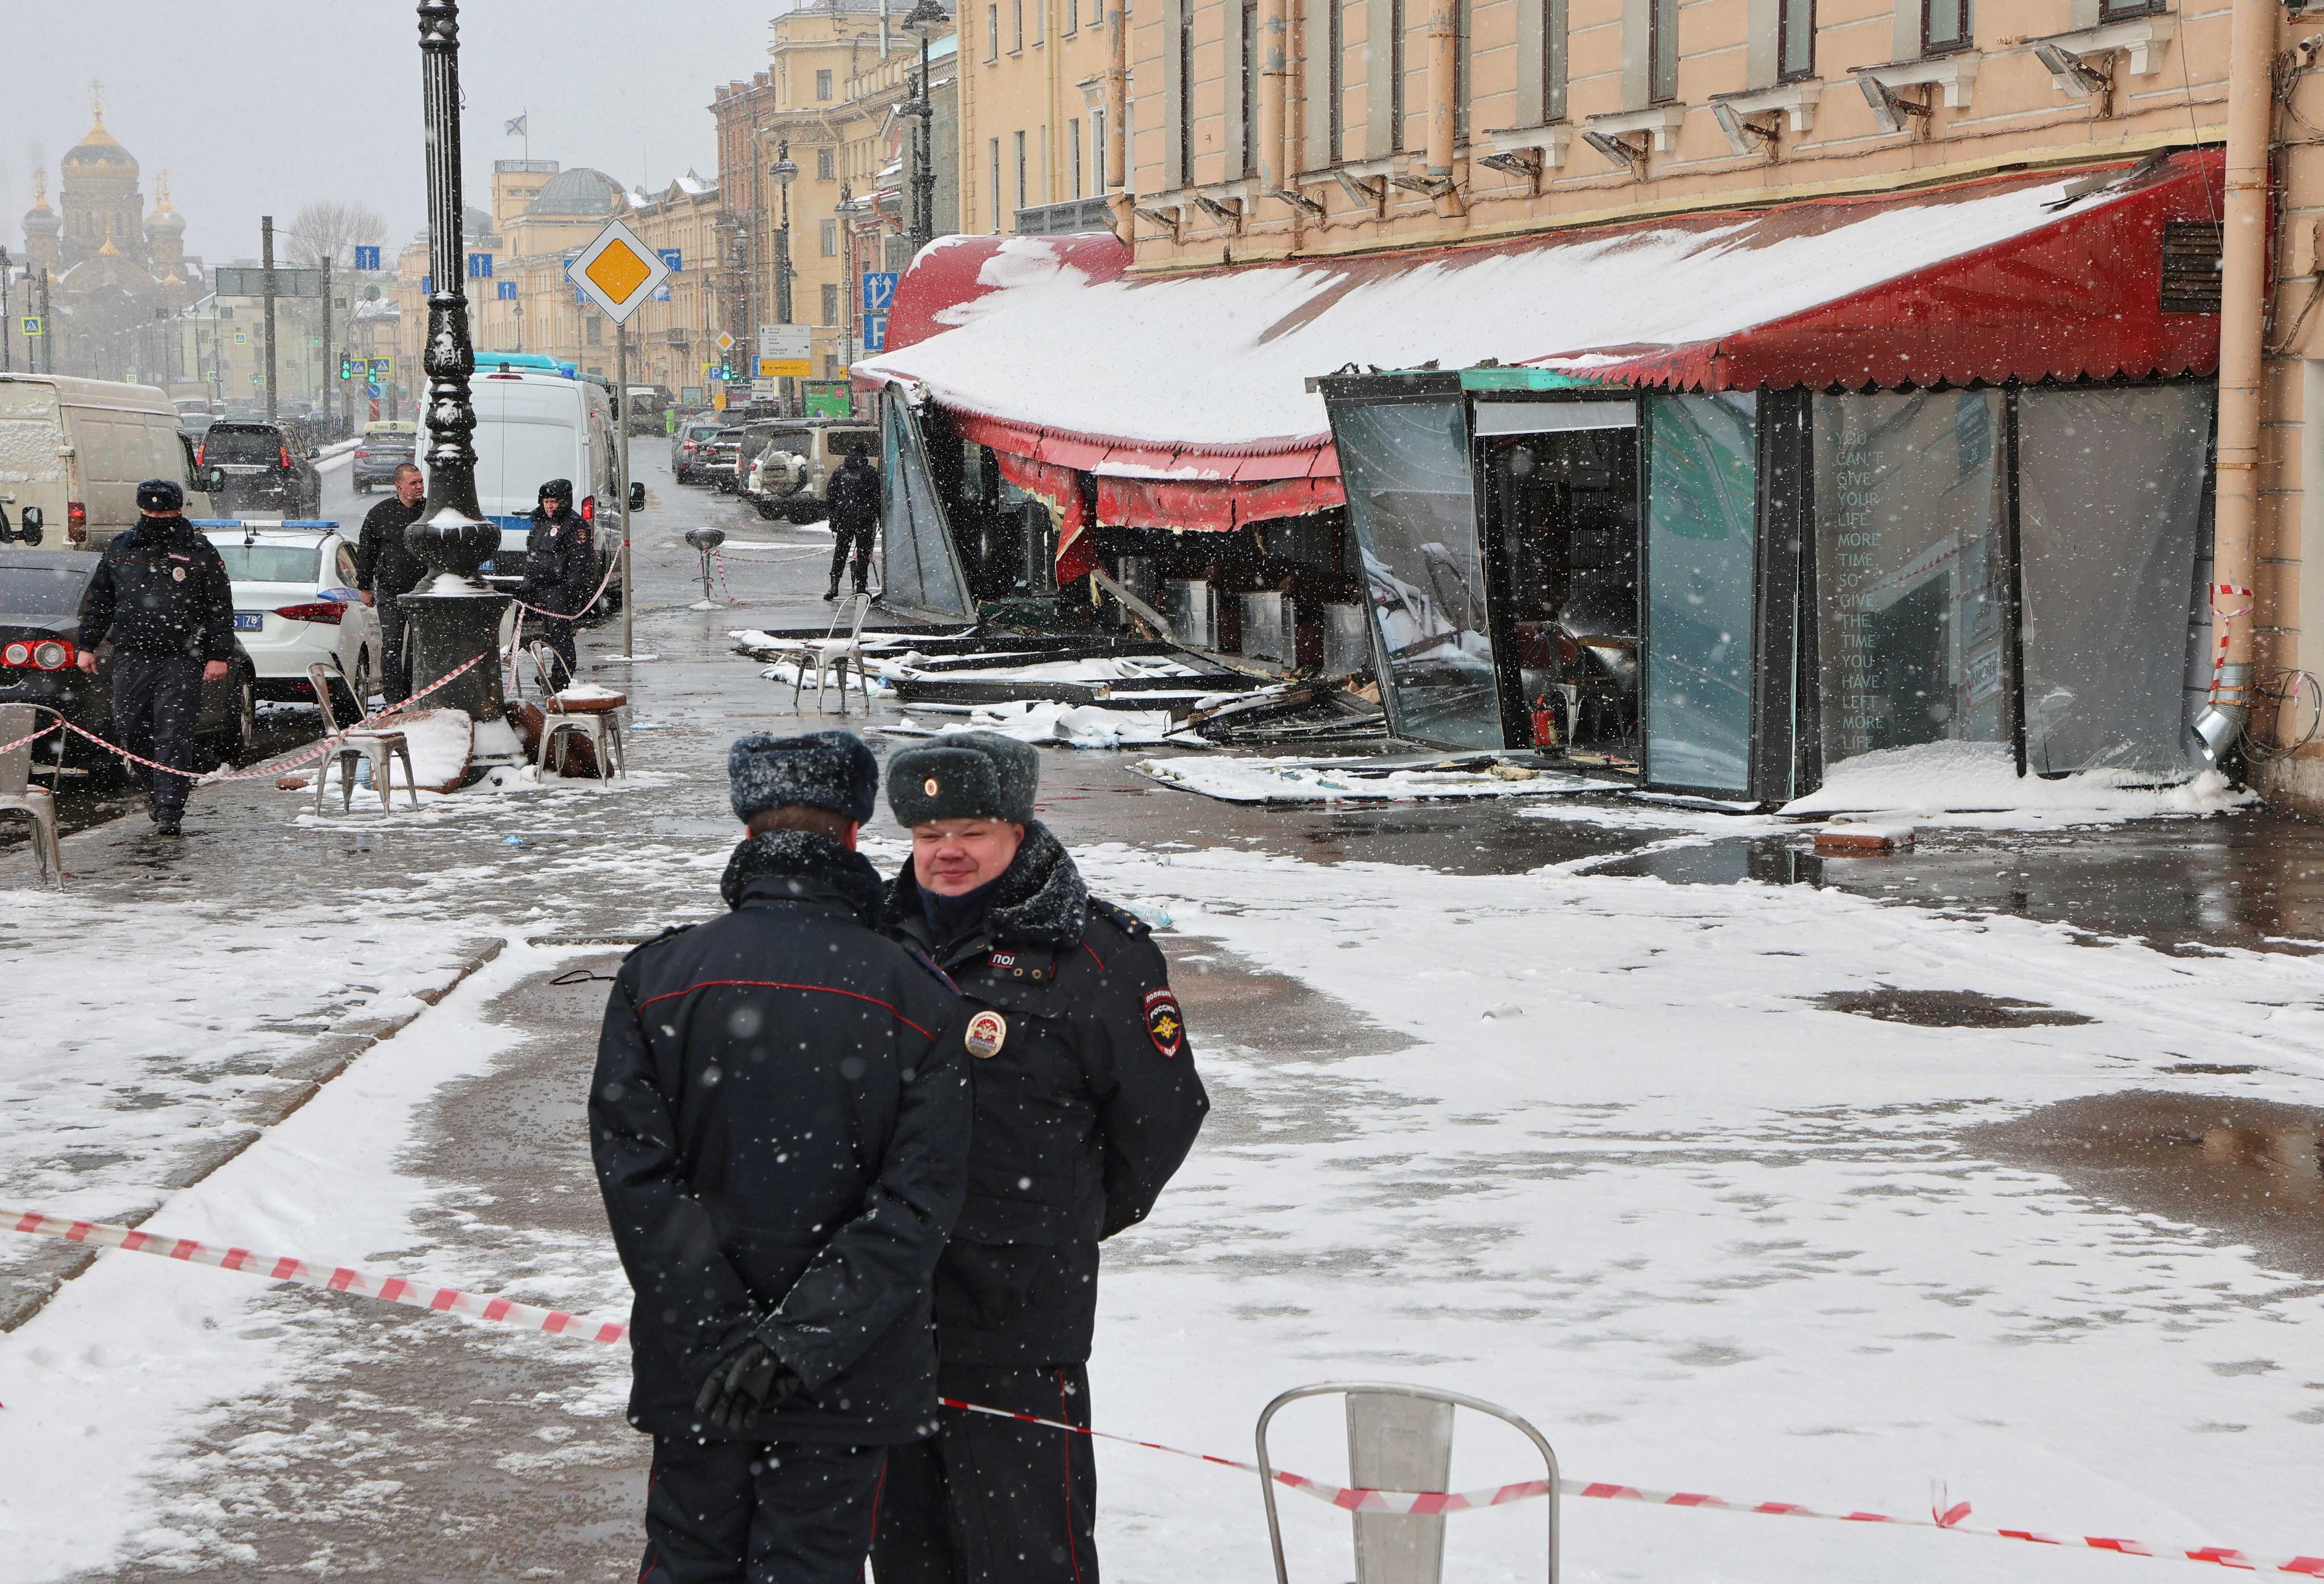 Police officers stand guard at the scene of the cafe explosion in which Russian military blogger Vladlen Tatarsky, (real name Maxim Fomin) was killed the day before in Saint Petersburg, Russia April 3. Photo: Reuters